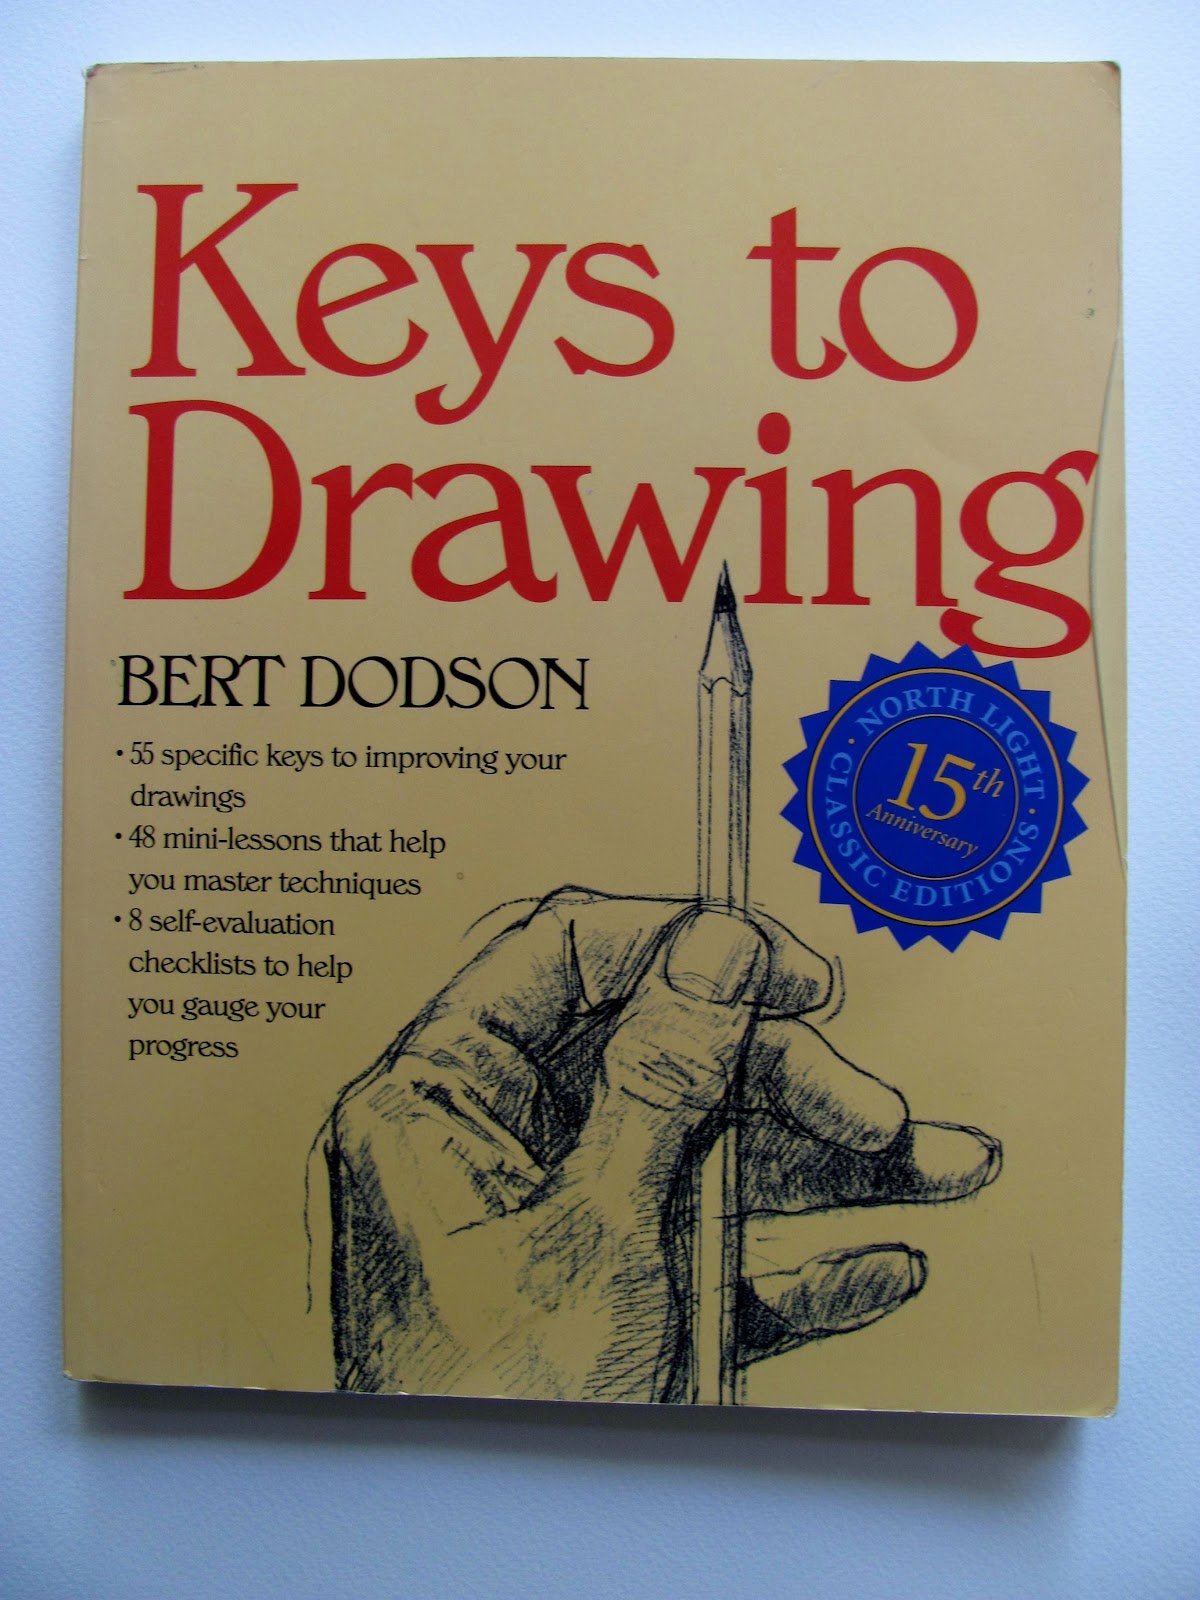 23. KEYS TO DRAWING WITH IMAGINATION, BY BERT DODSON REVIEW